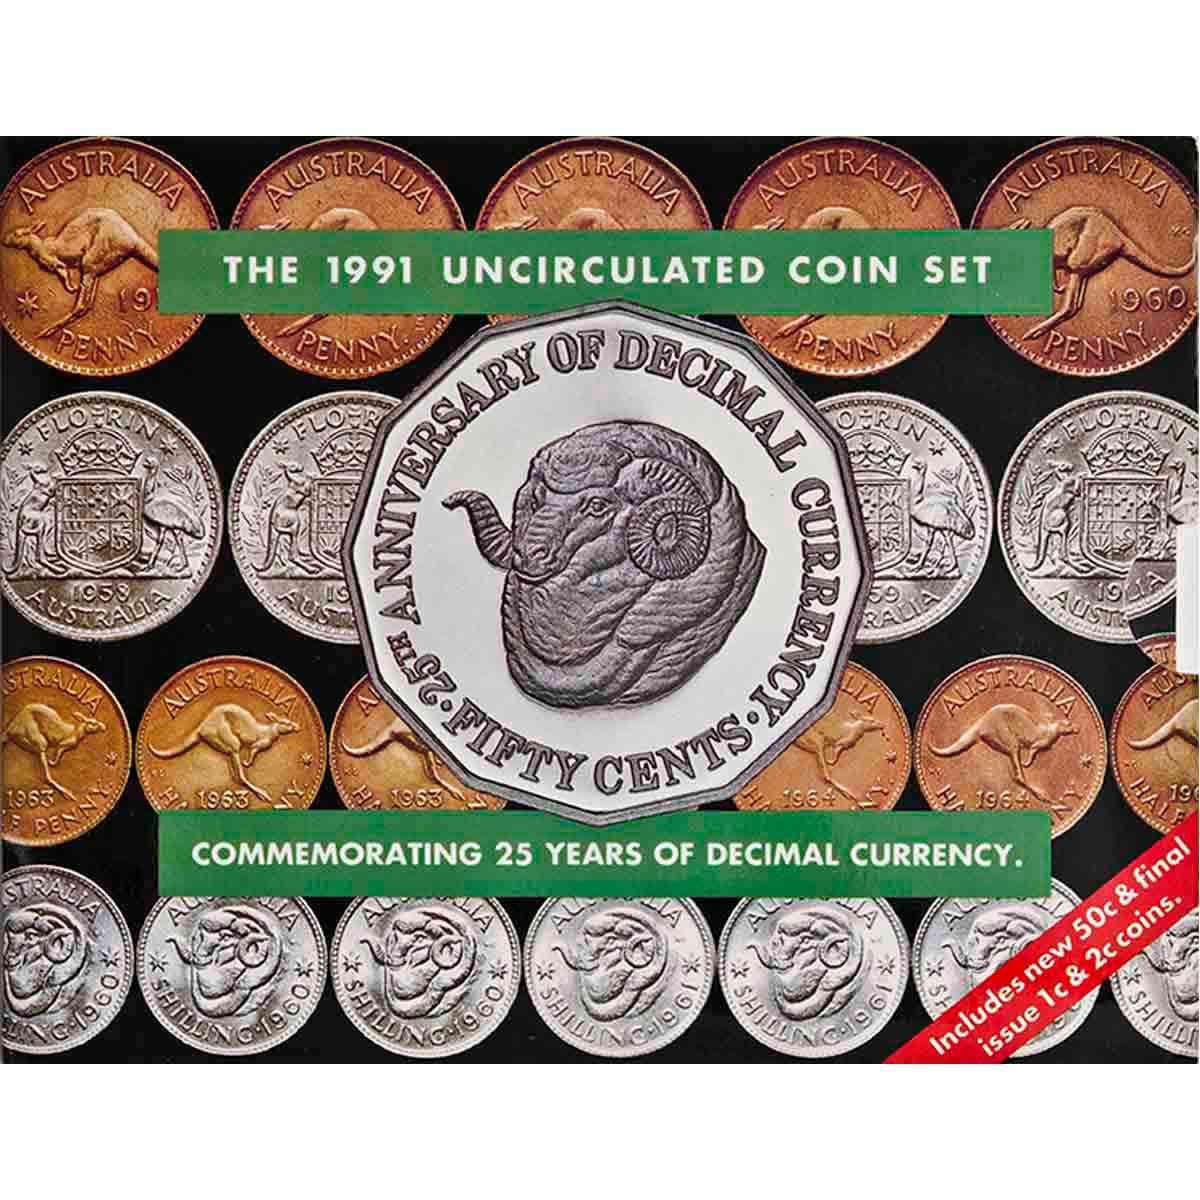 1991 Royal Australian Mint Uncirculated 6 Coin Set - 25th Anniversary of Decimal Currency - Loose Change Coins